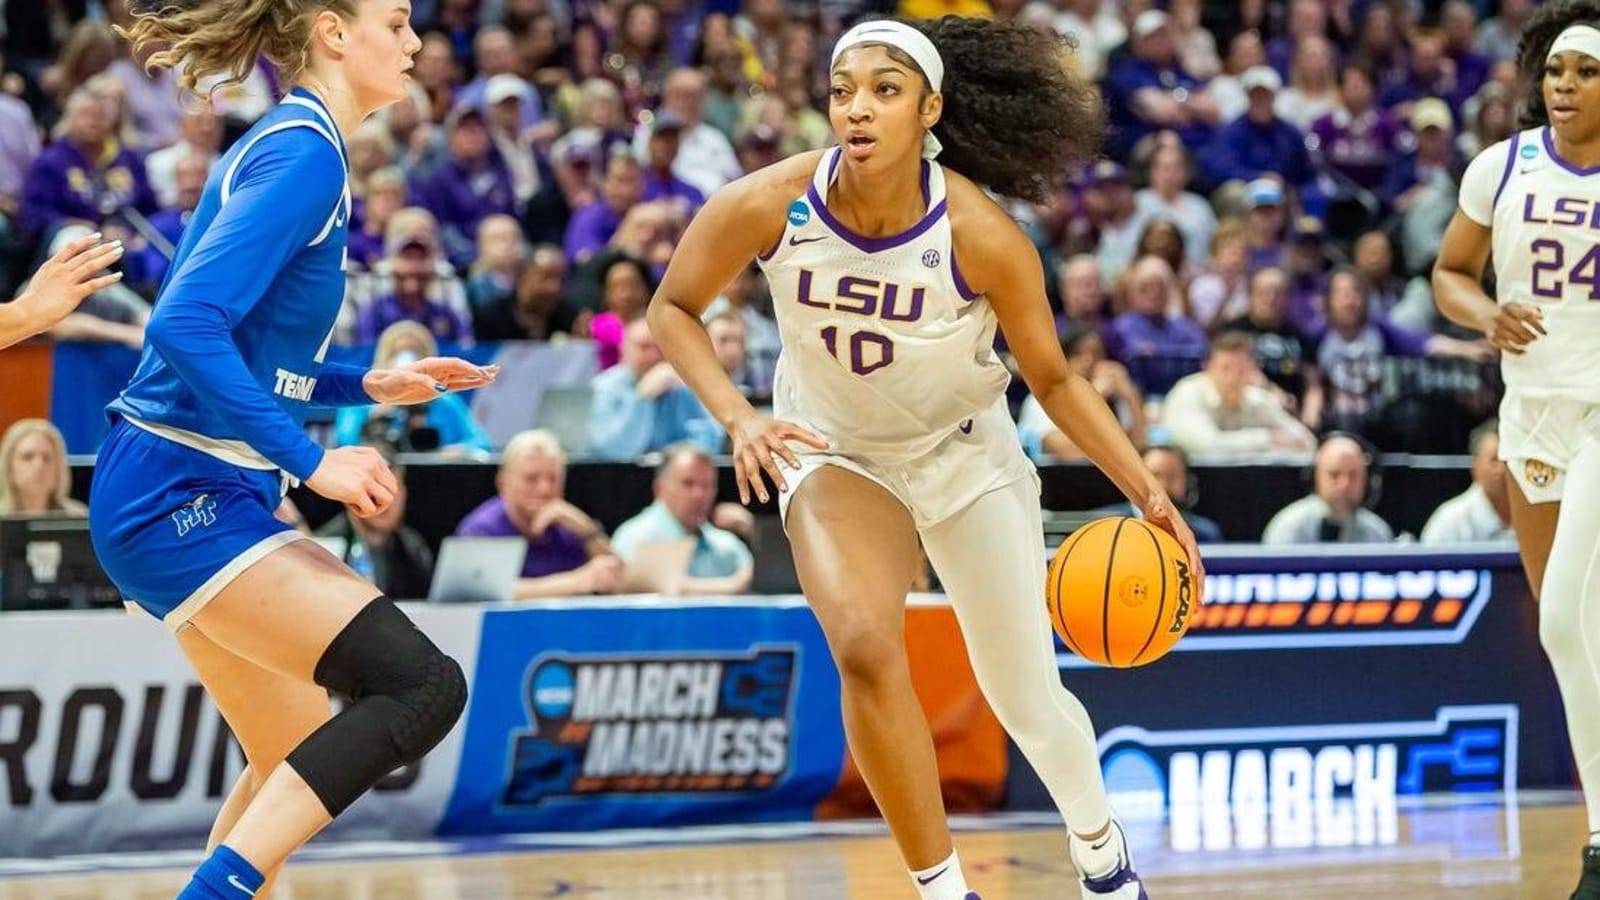 LSU dominates 2nd half to clobber Middle Tennessee